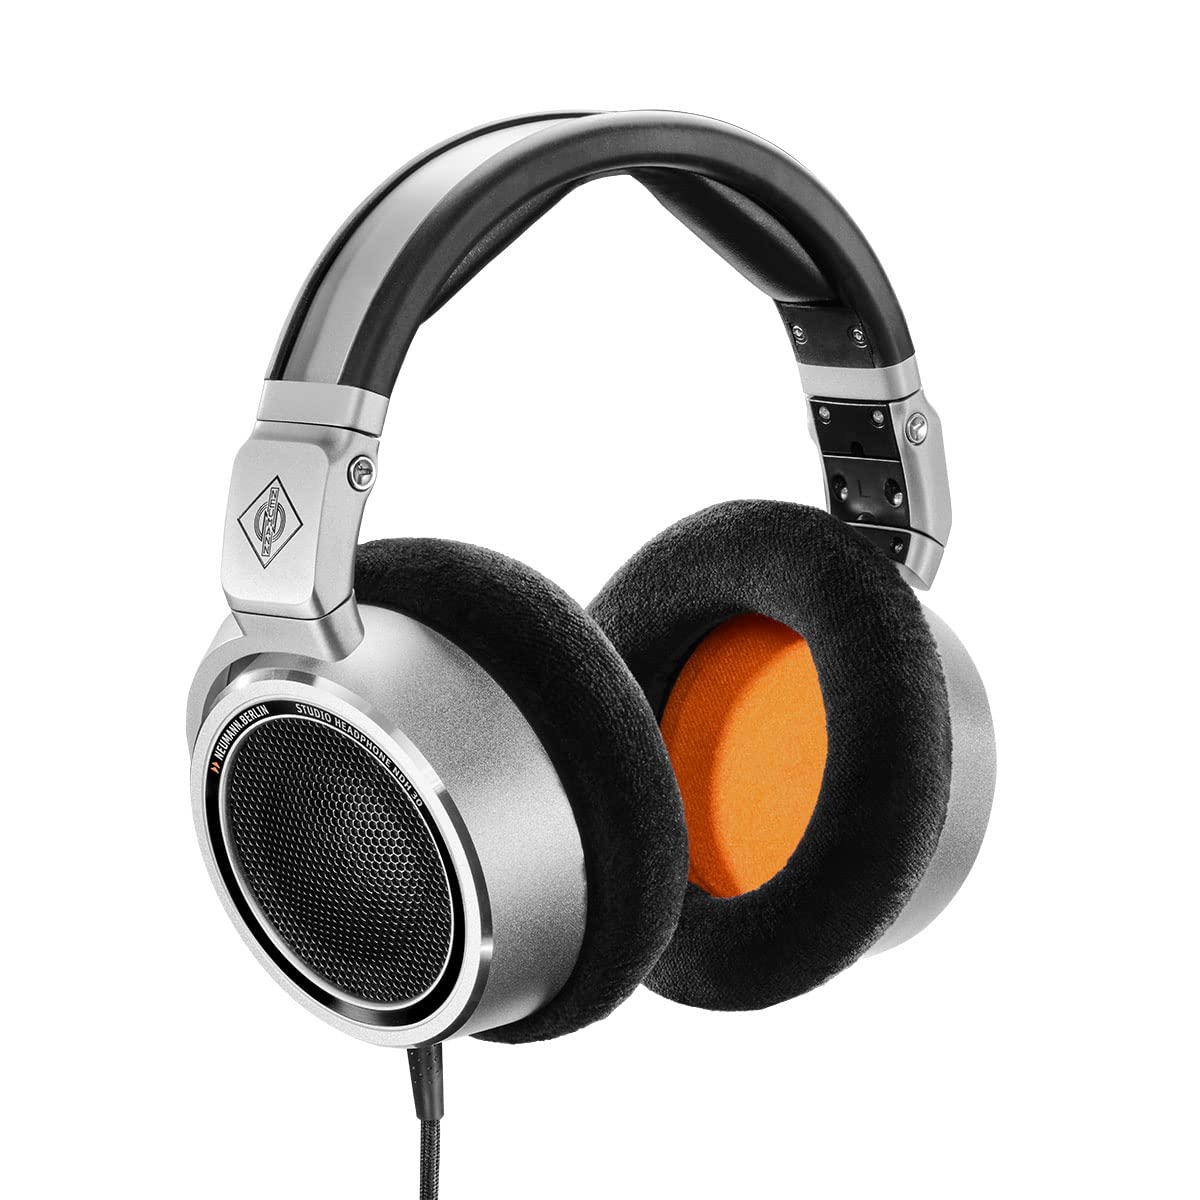 Neumann NDH 30 Dynamic Open-Back Headphone for Professional Mixing, Mastering, Twitch, YouTube, Podcast, Production, High Definition Music Listening, Titanium (509111)